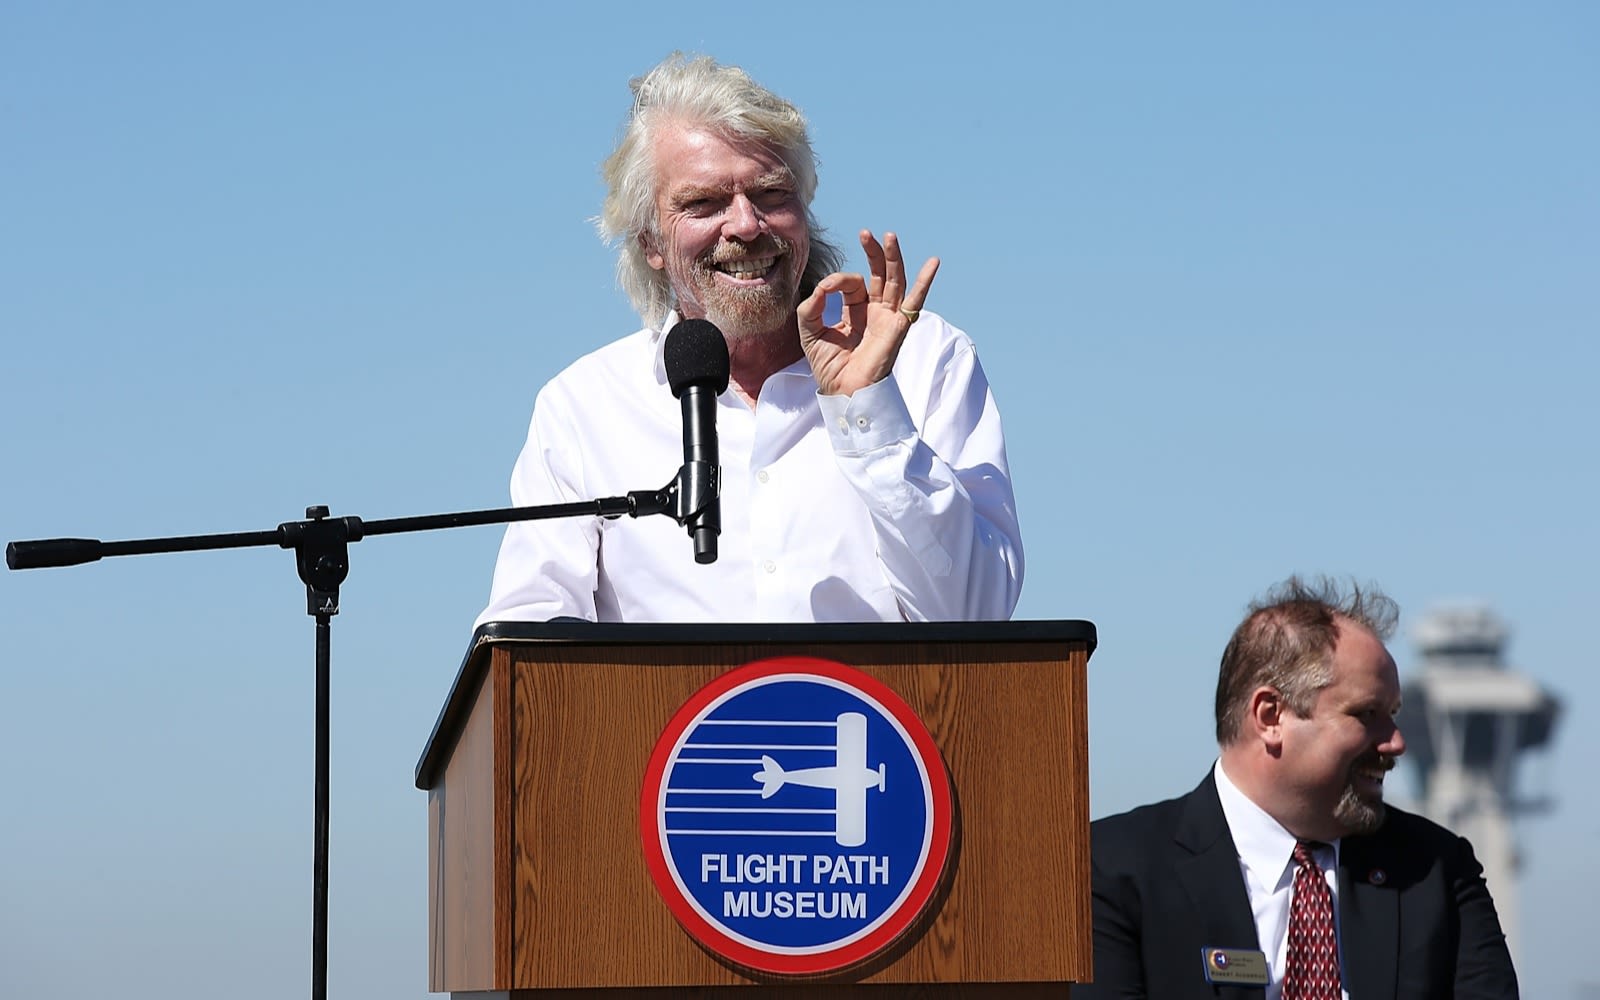 Richard Branson smiles while giving a speech at the Flight Path Museum